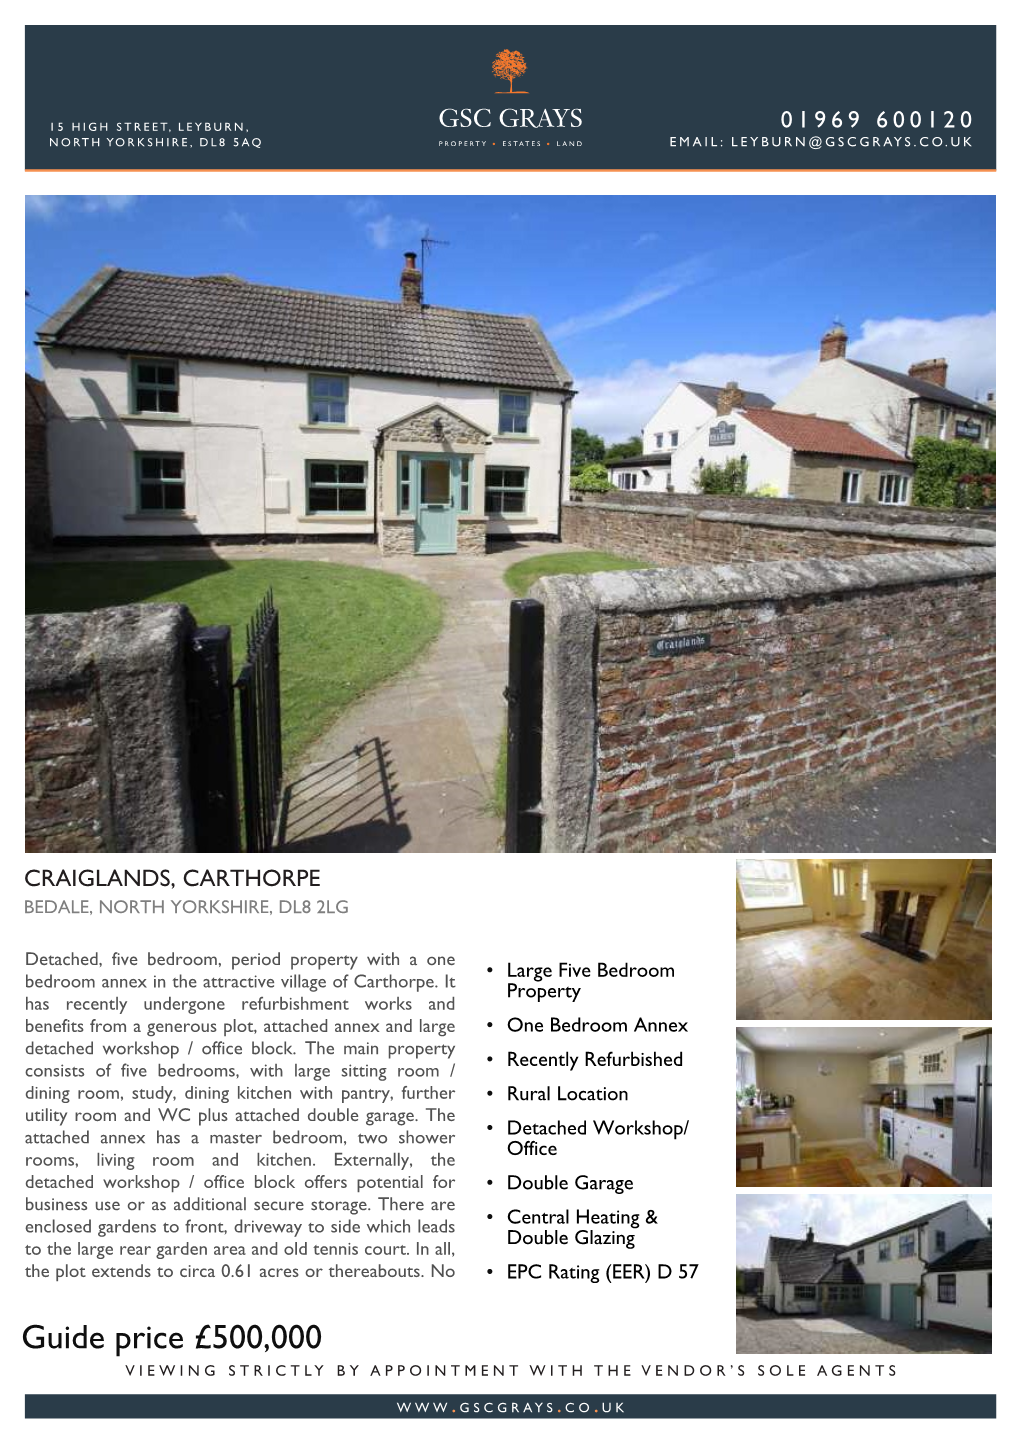 Guide Price £500,000 VIEWING STRICTLY by APPOINTMENT with the VENDOR’S SOLE AGENTS